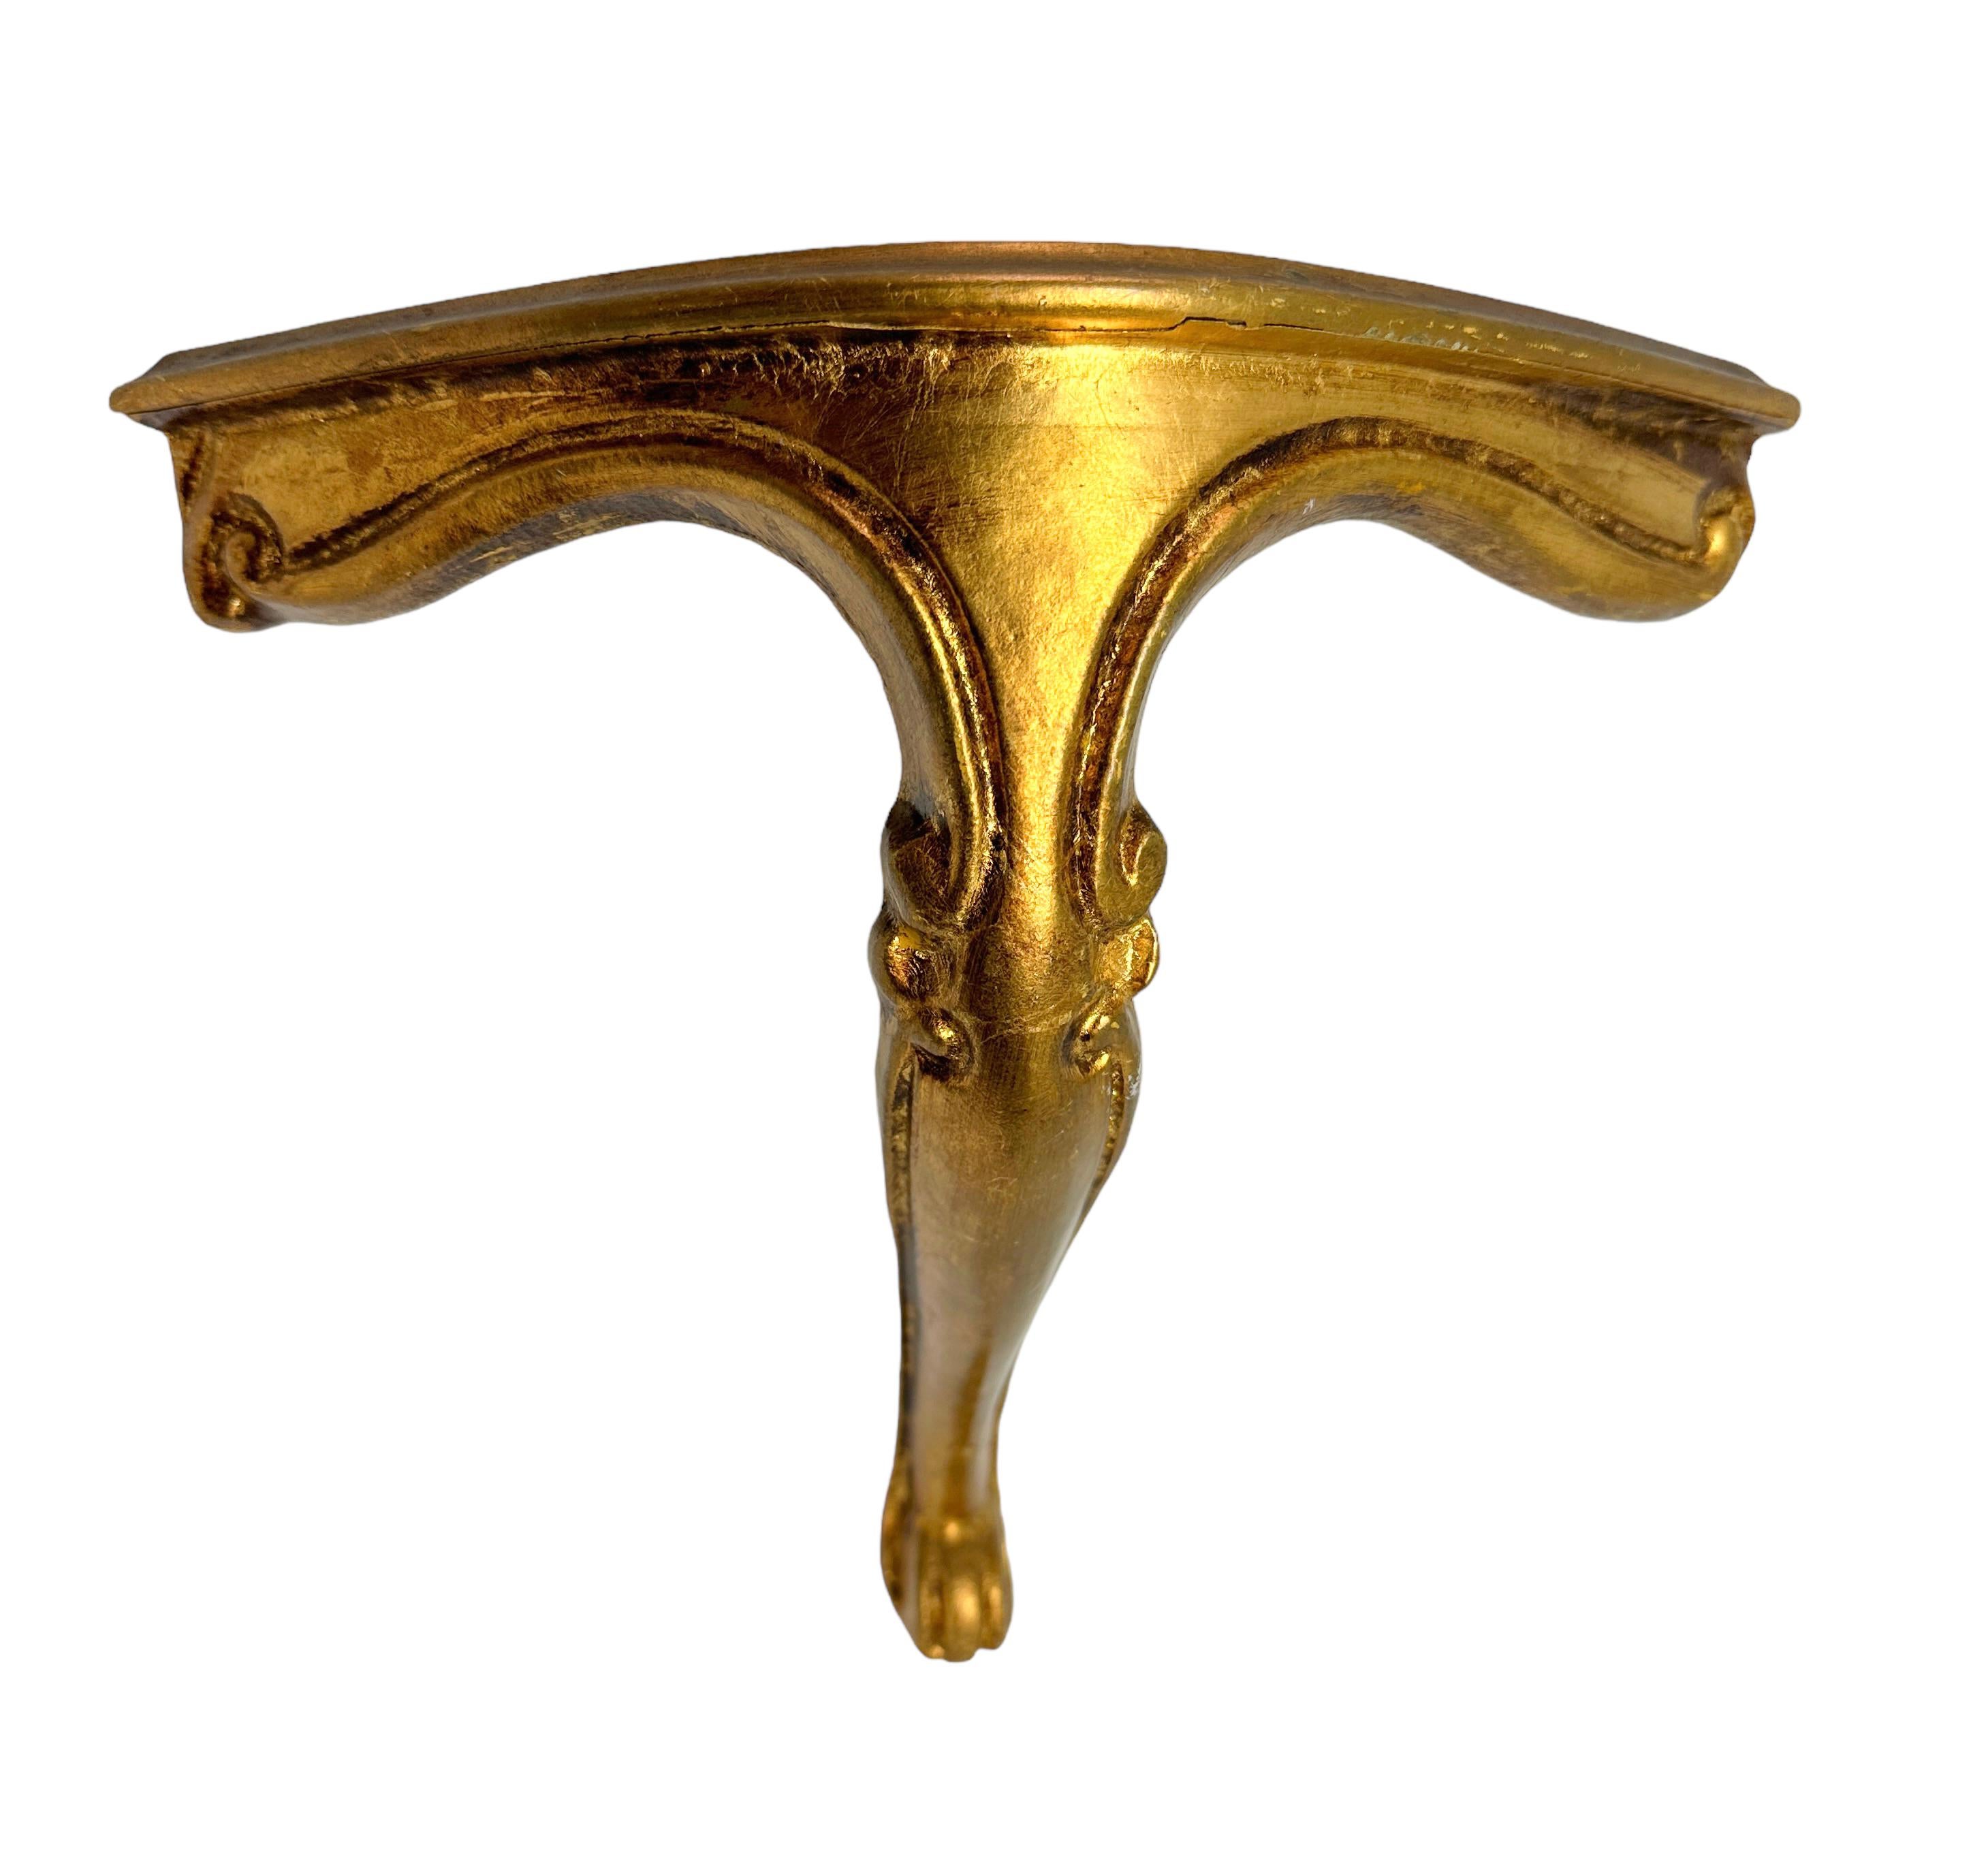 Offered is an absolutely stunning, 1960s Italian giltwood wall corner shelf or wall console. Minor patina and paint lost gives this piece a classy statement. Made of hand carved wood and gold plated. A nice shelf to present a statuette or a